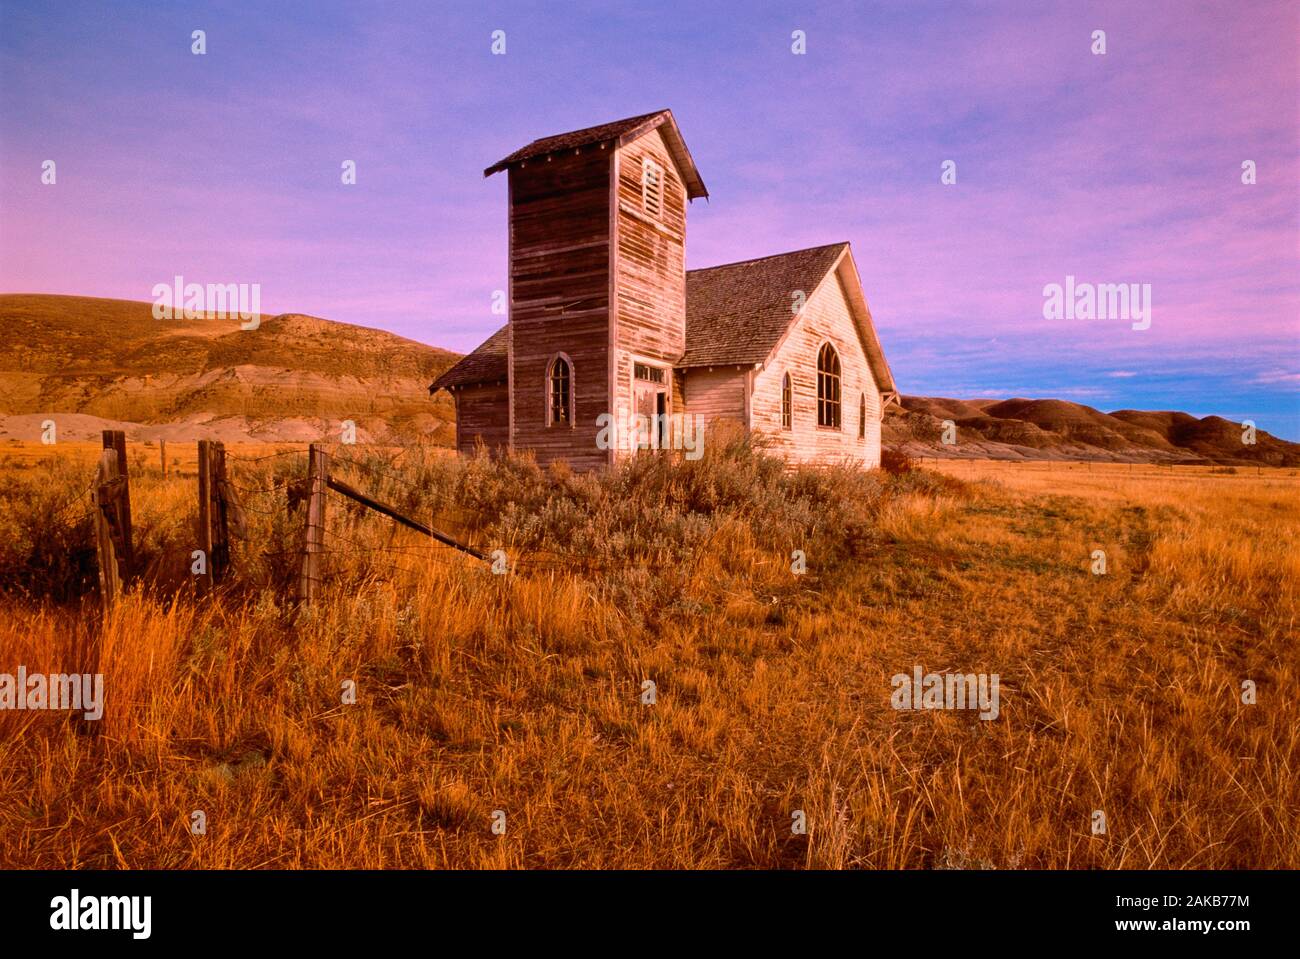 Abandoned house in meadow, Dorothy, Alberta, Canada Stock Photo